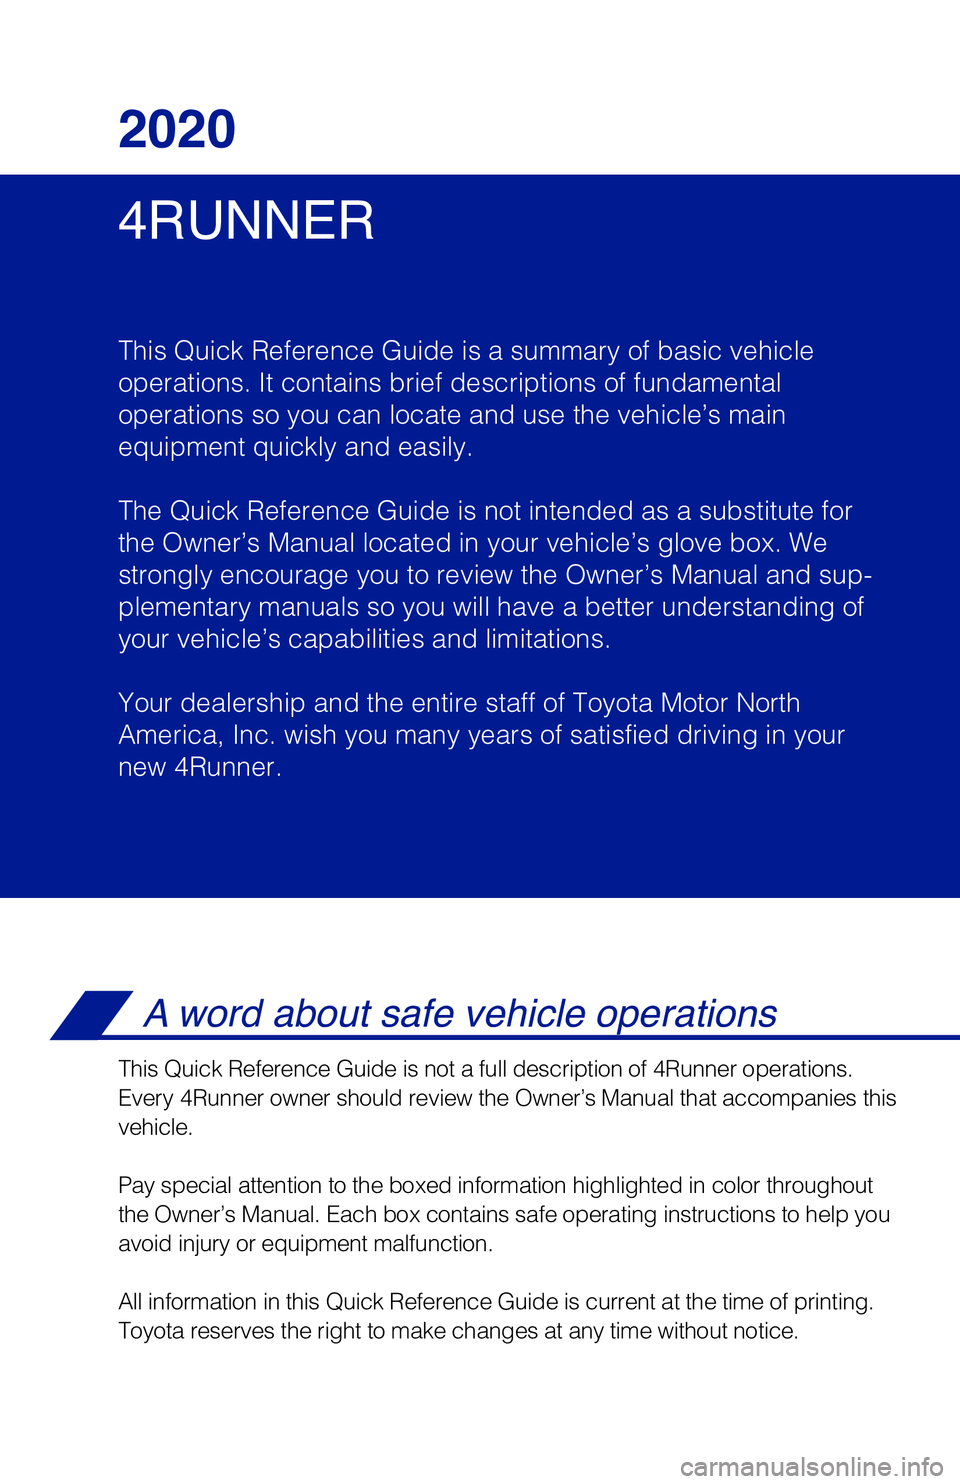 TOYOTA 4RUNNER 2020  Owners Manual (in English) 4RUNNER 2020
This Quick Reference Guide is a summary of basic vehicle
operations. It contains brief descriptions of fundamental
operations so you can locate and use the vehicle’s main 
equipment qui